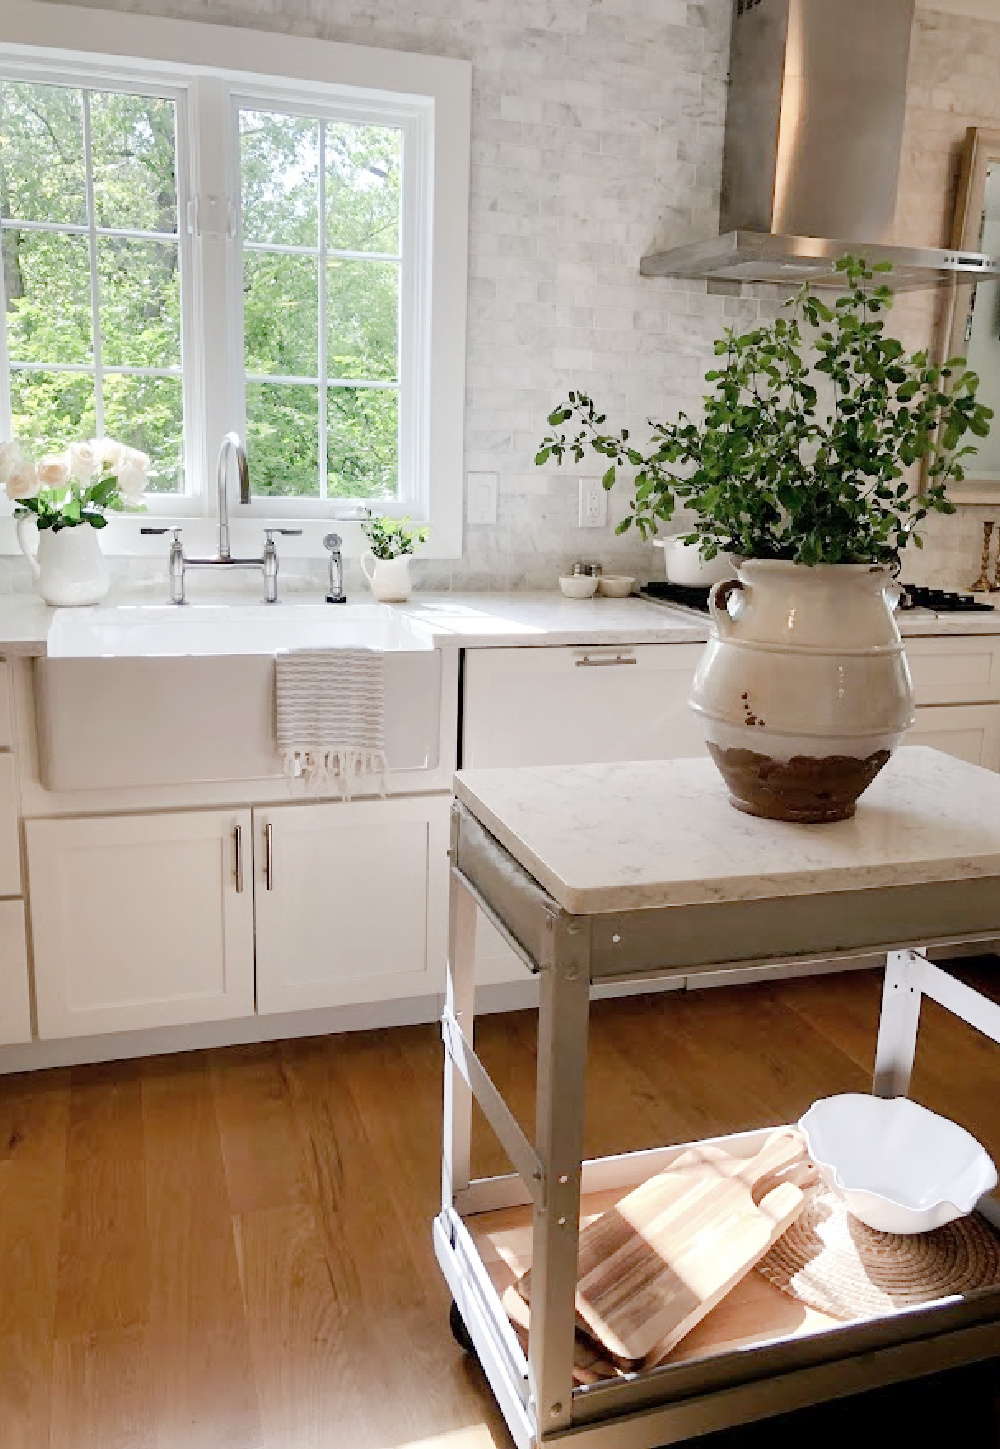 Hello Lovely's white European country modern French kitchen with Minuet Viatera quartz counters, farm sink, industrial cart, and marble subway backsplash.